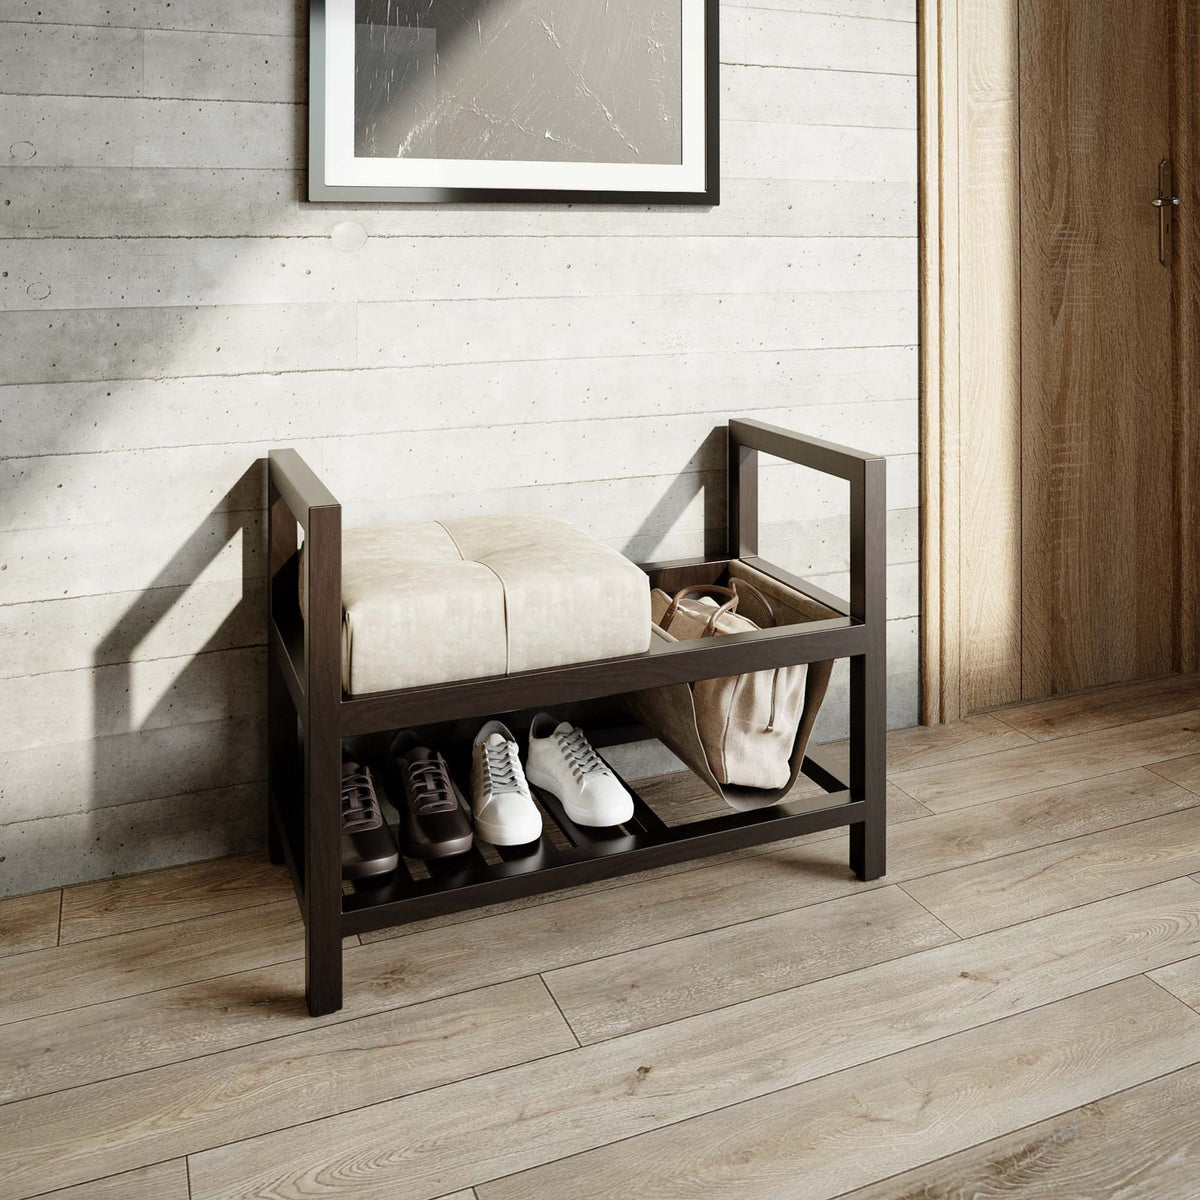 Cortesi Home Oliver Entryway Bench with Storage and Shoe Rack, Espresso Wood and Grey